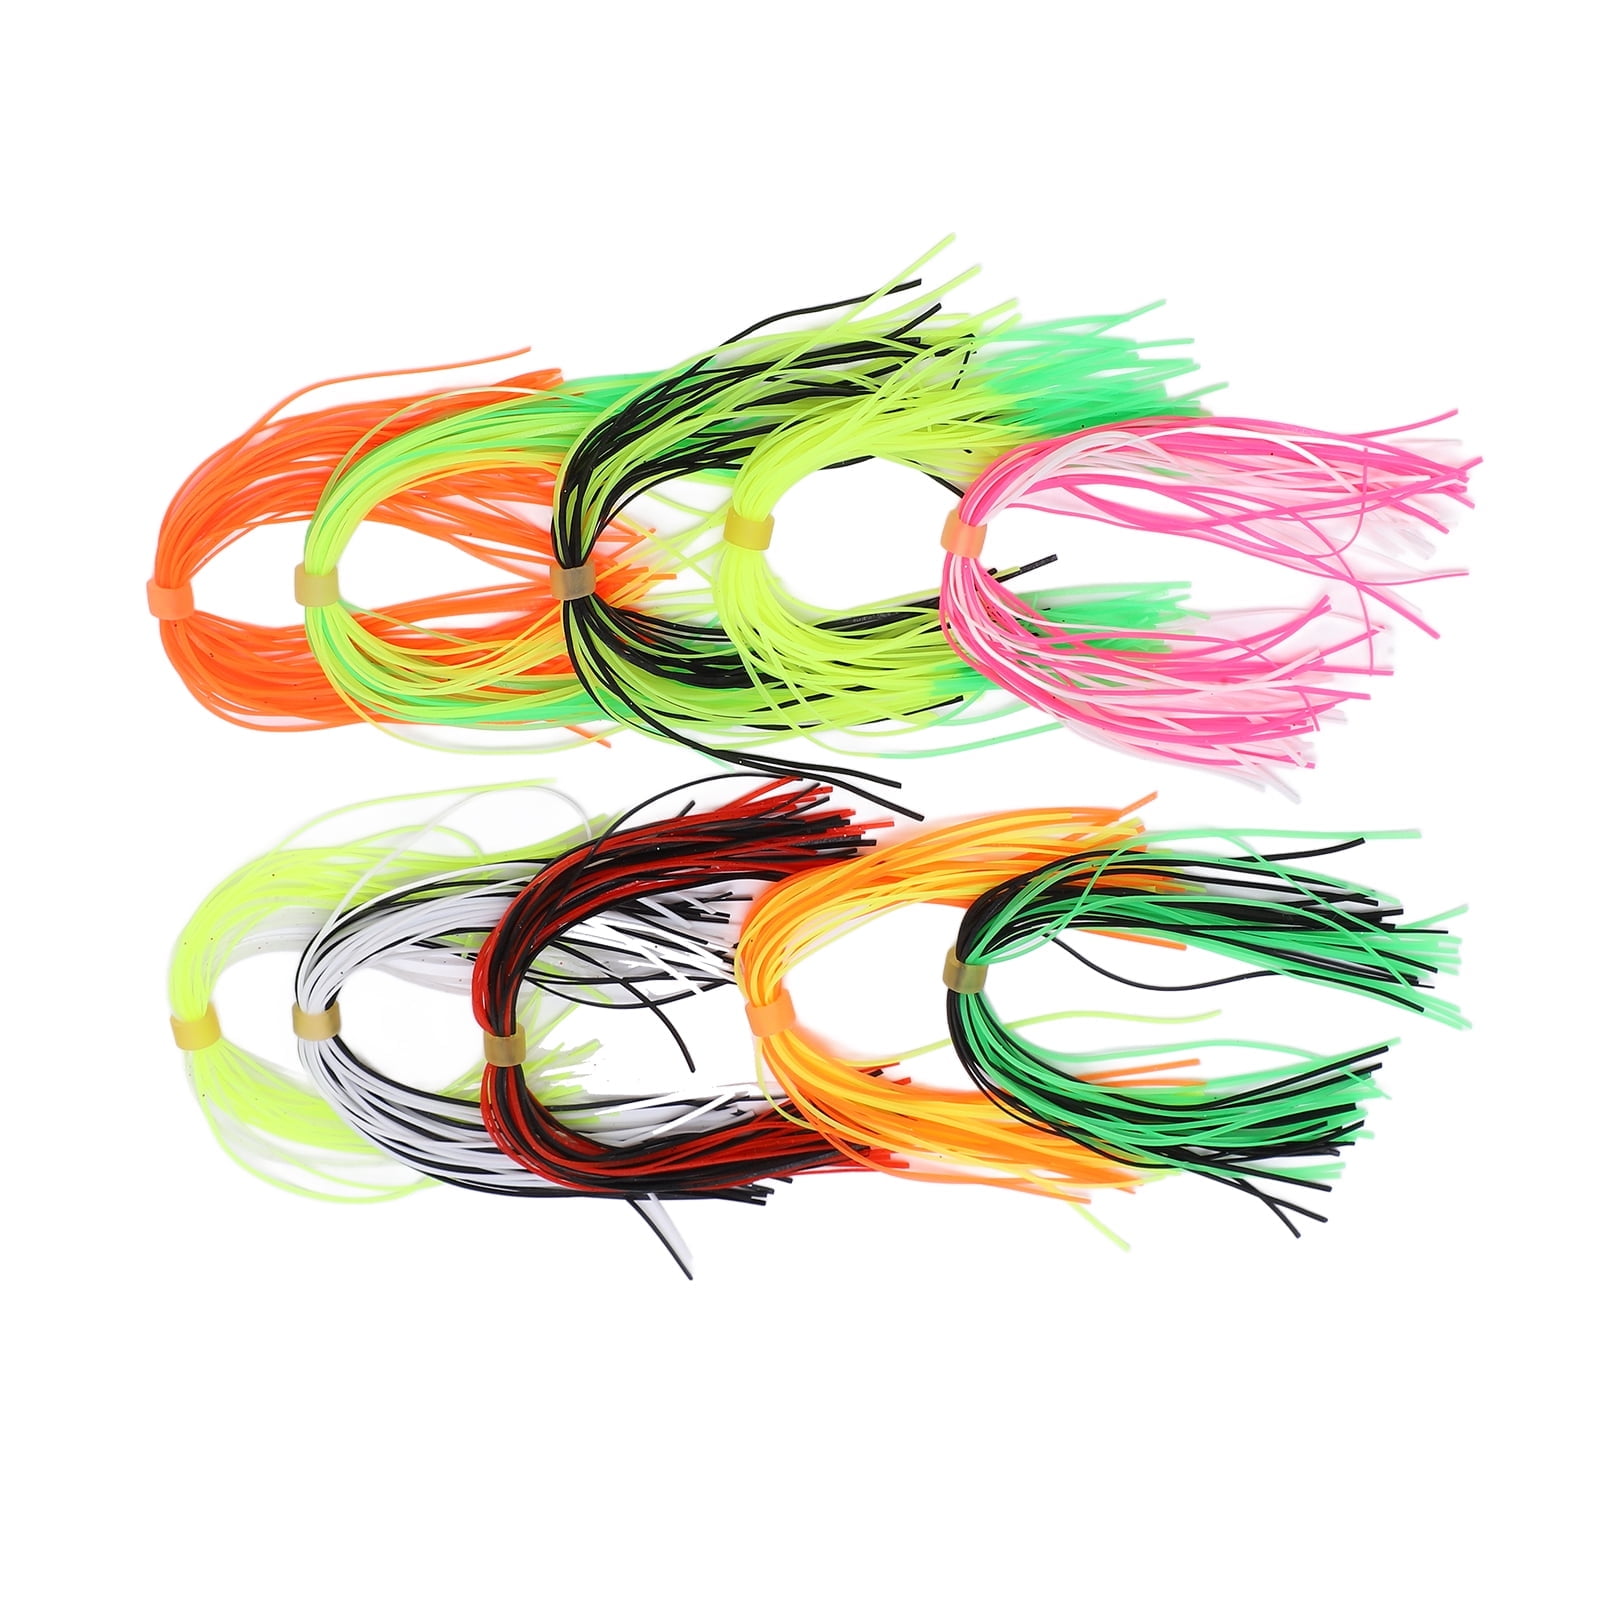 Jig Skirts Lures Kit Replacement Skirts for Spinnerbait Skirts 88 Strands  Quick Change Jig Skirts Fishing Bait Accessories